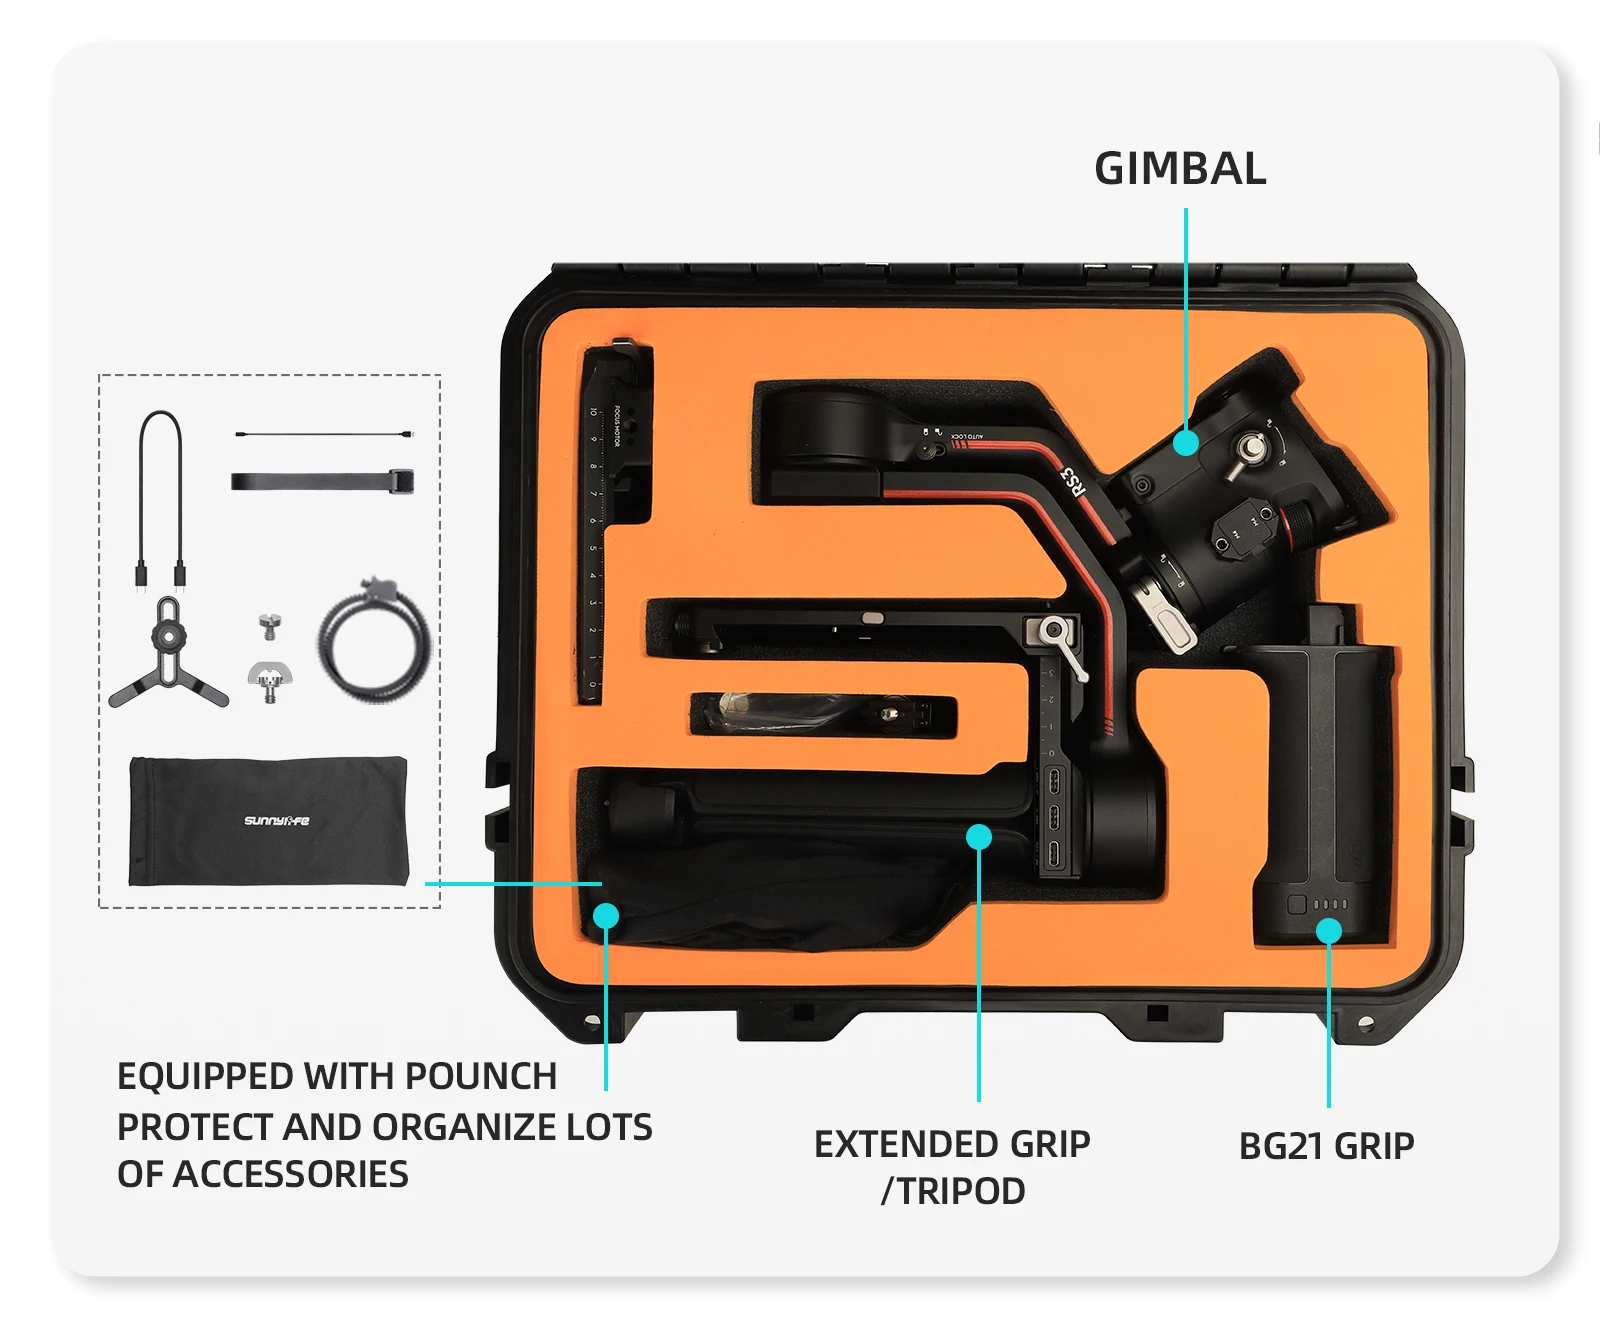 For DJI Ruying RS3 Safety Box Waterproof Storage Bag Handheld Gimbal Stabilizer Outdoor Protective Suitcase Not Easy To Deform enlarge